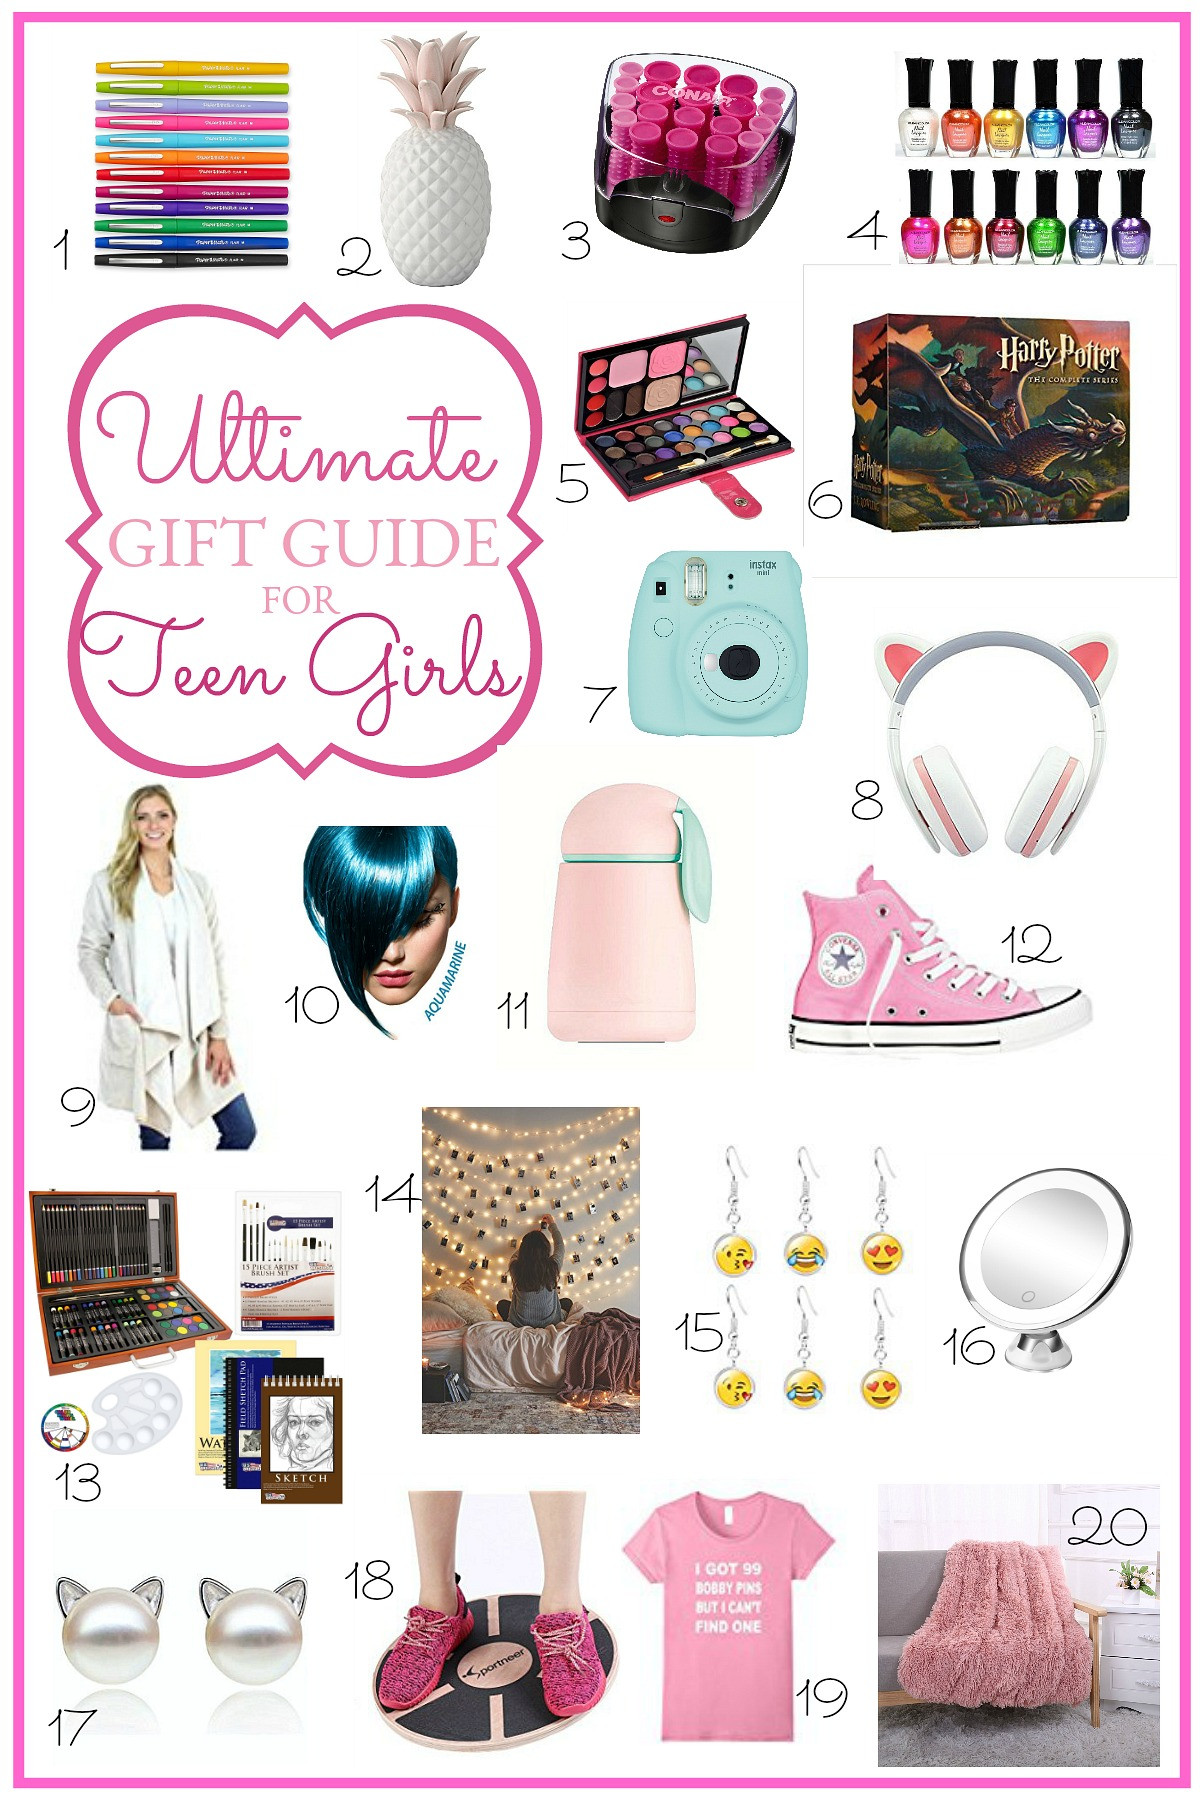 Girls Gift Ideas
 Ultimate Holiday Gift Guide for Teen Girls